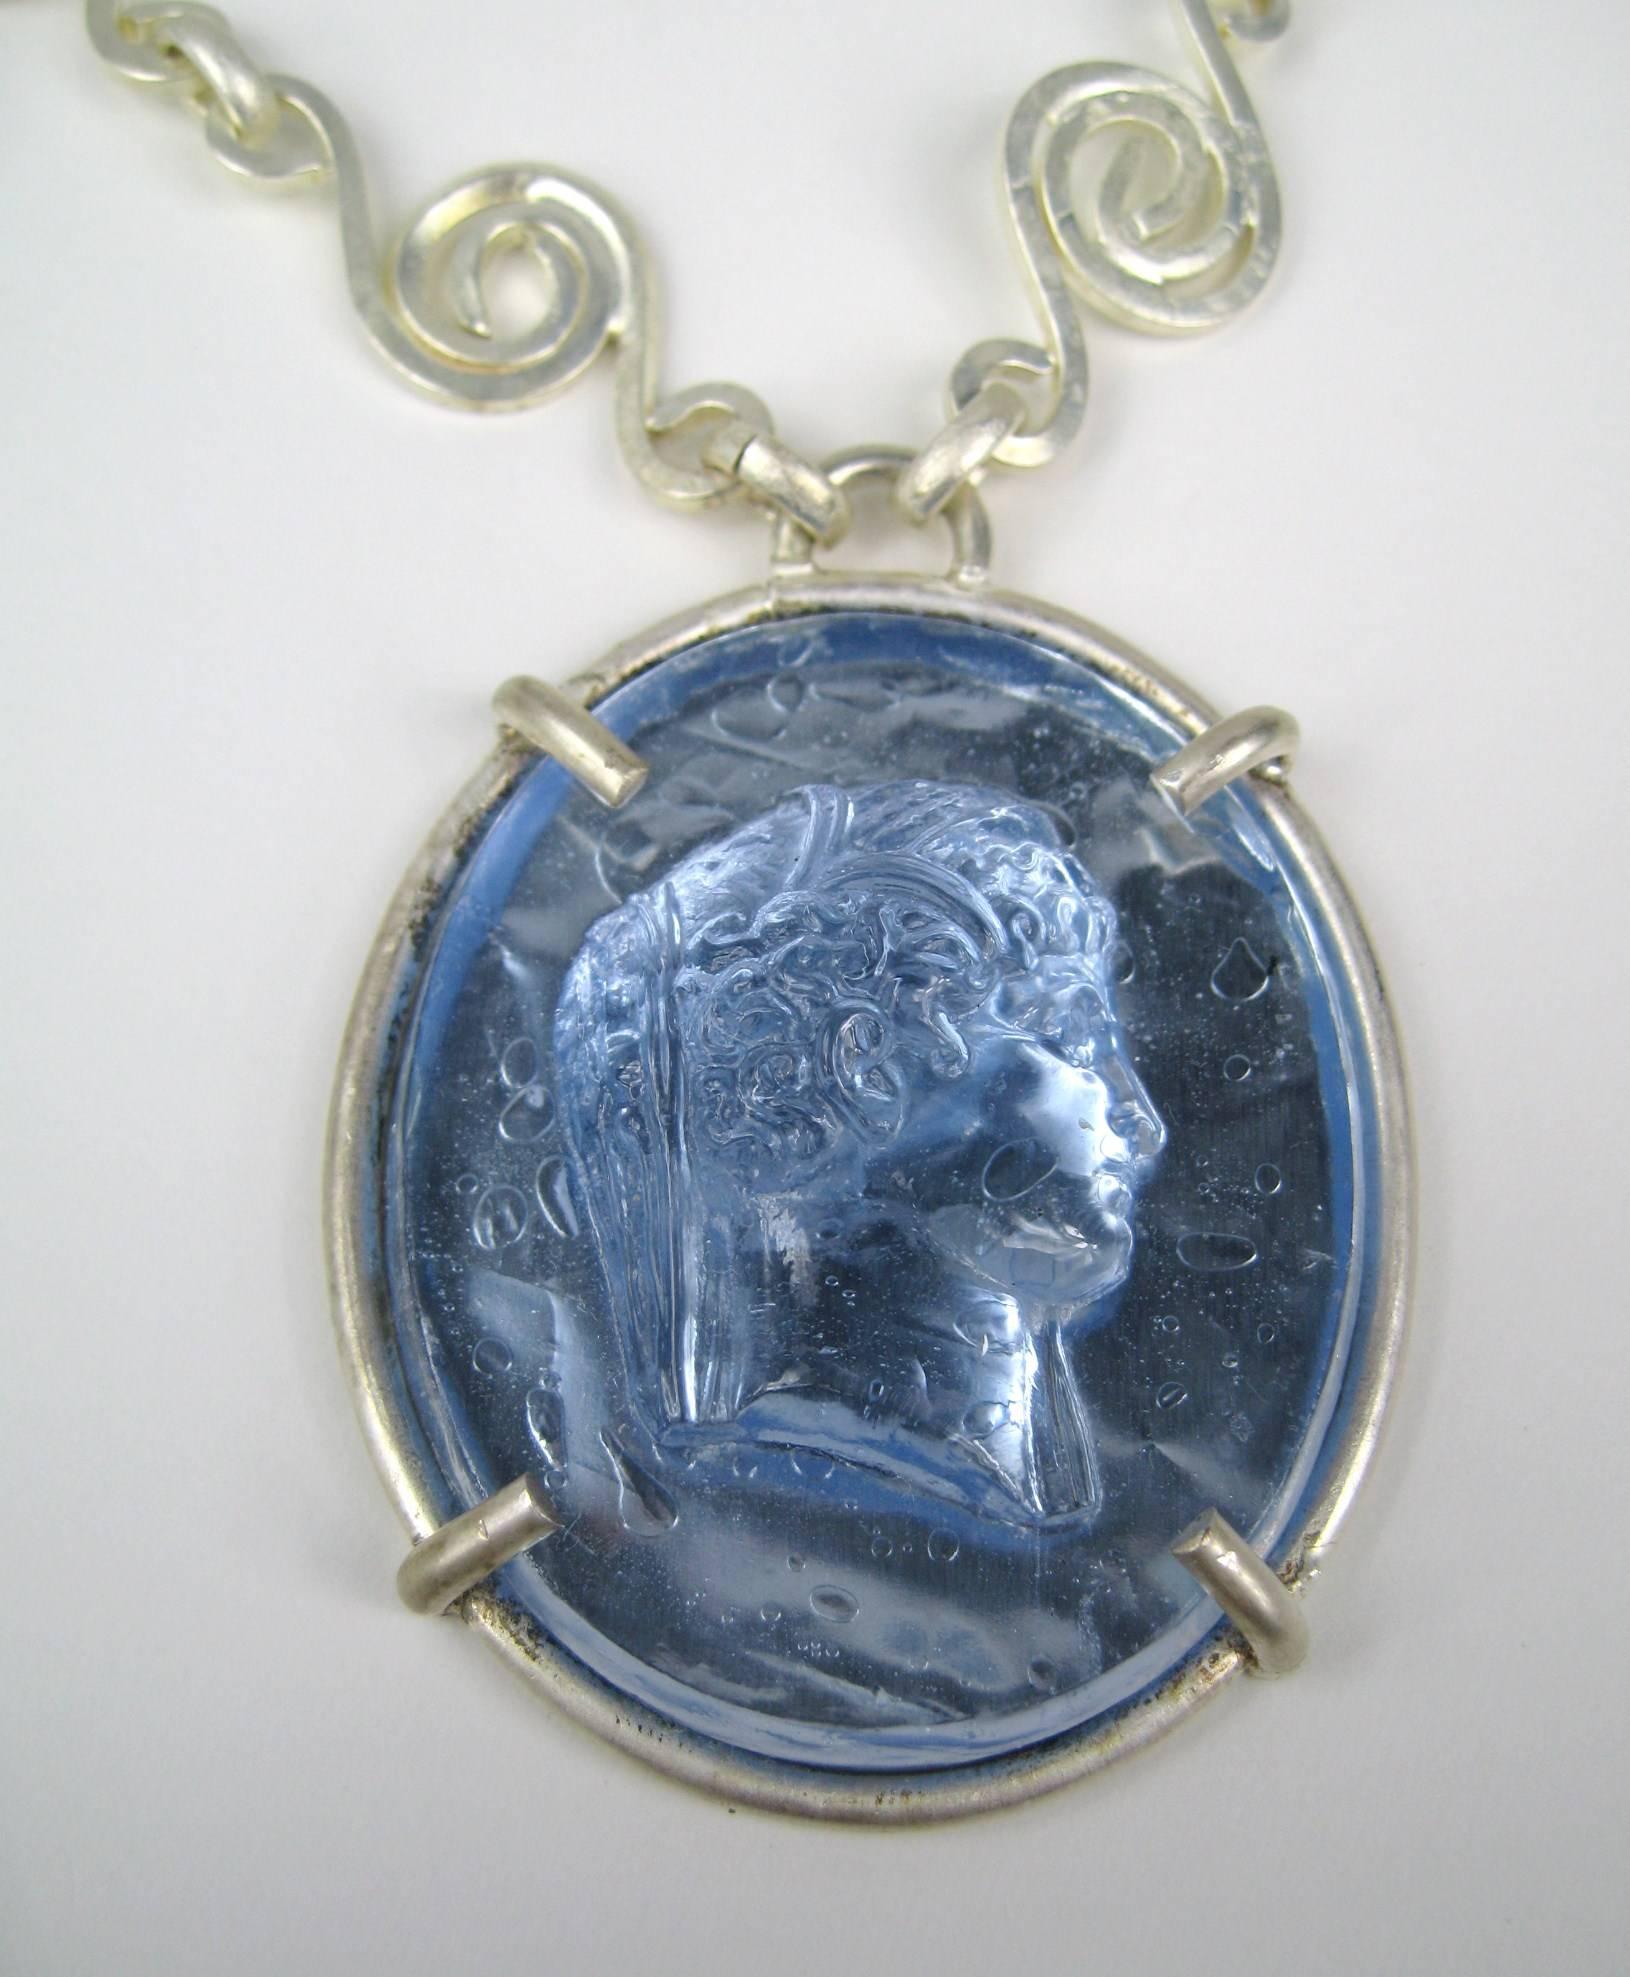 Stunning ocean blue Intaglio Set in silver Tone.  Large circular motif chain with a Toggle closure. Measuring 29.5 in end to end. 1.86 in x 2.46 in top to bottom. This French jewelry designer has a vast international customer base and is known